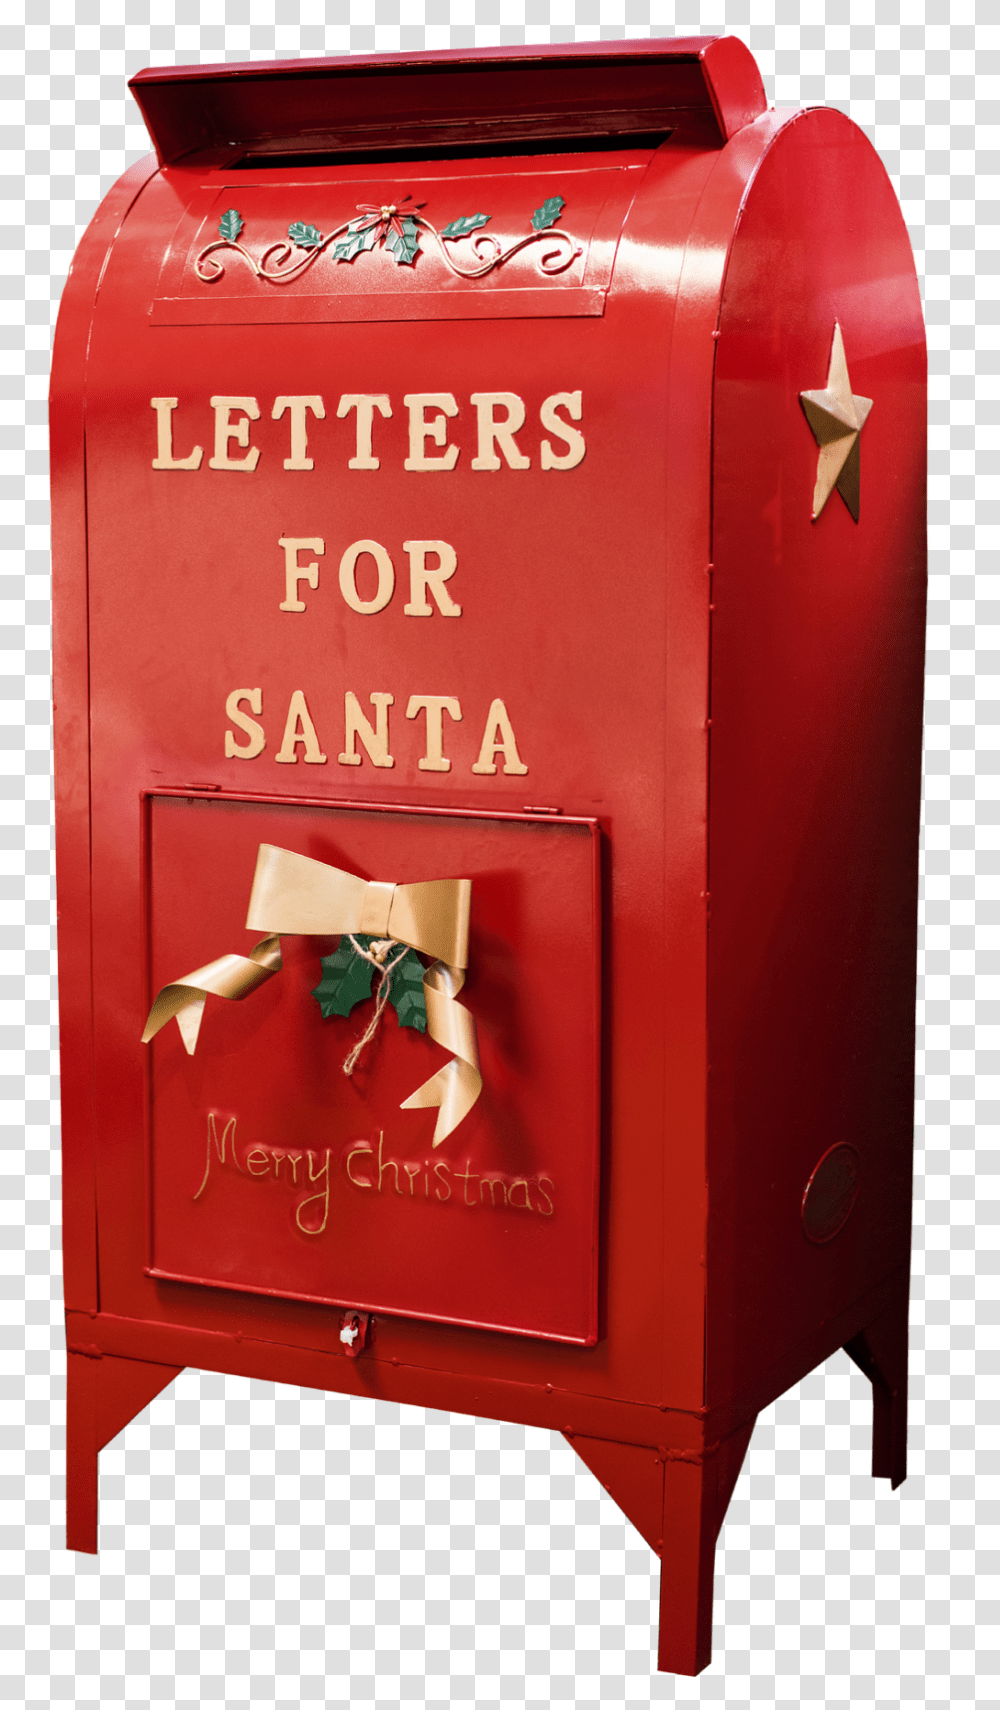 Santa Mailbox 1920Class Img Responsive Letters To Santa Mailbox, Letterbox, Postbox, Public Mailbox Transparent Png